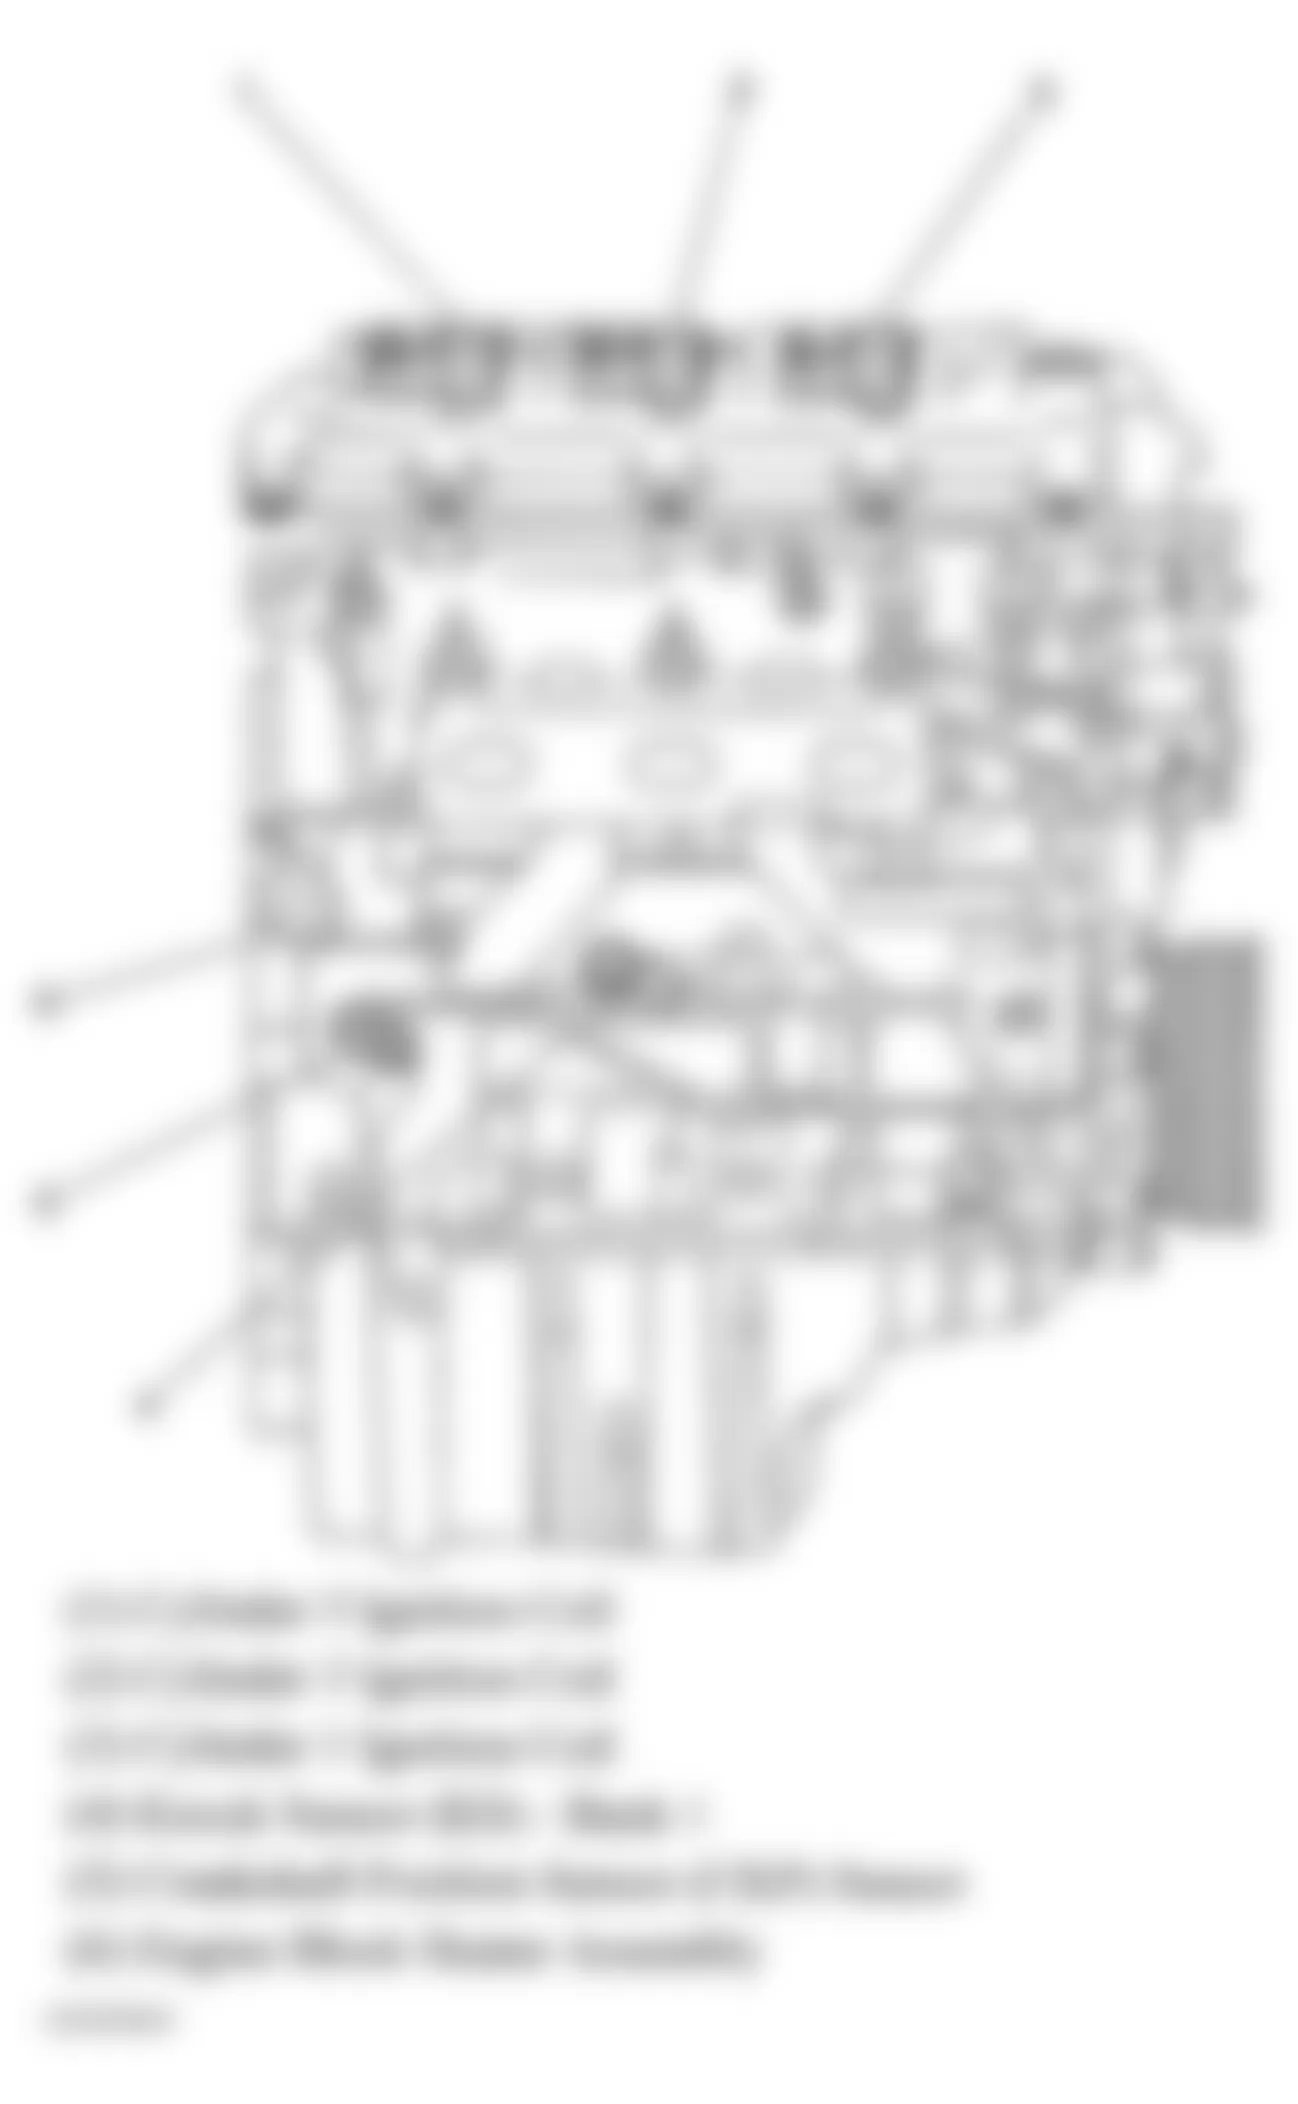 Buick Rendezvous CXL 2005 - Component Locations -  Left Side Of Engine (3.6L)